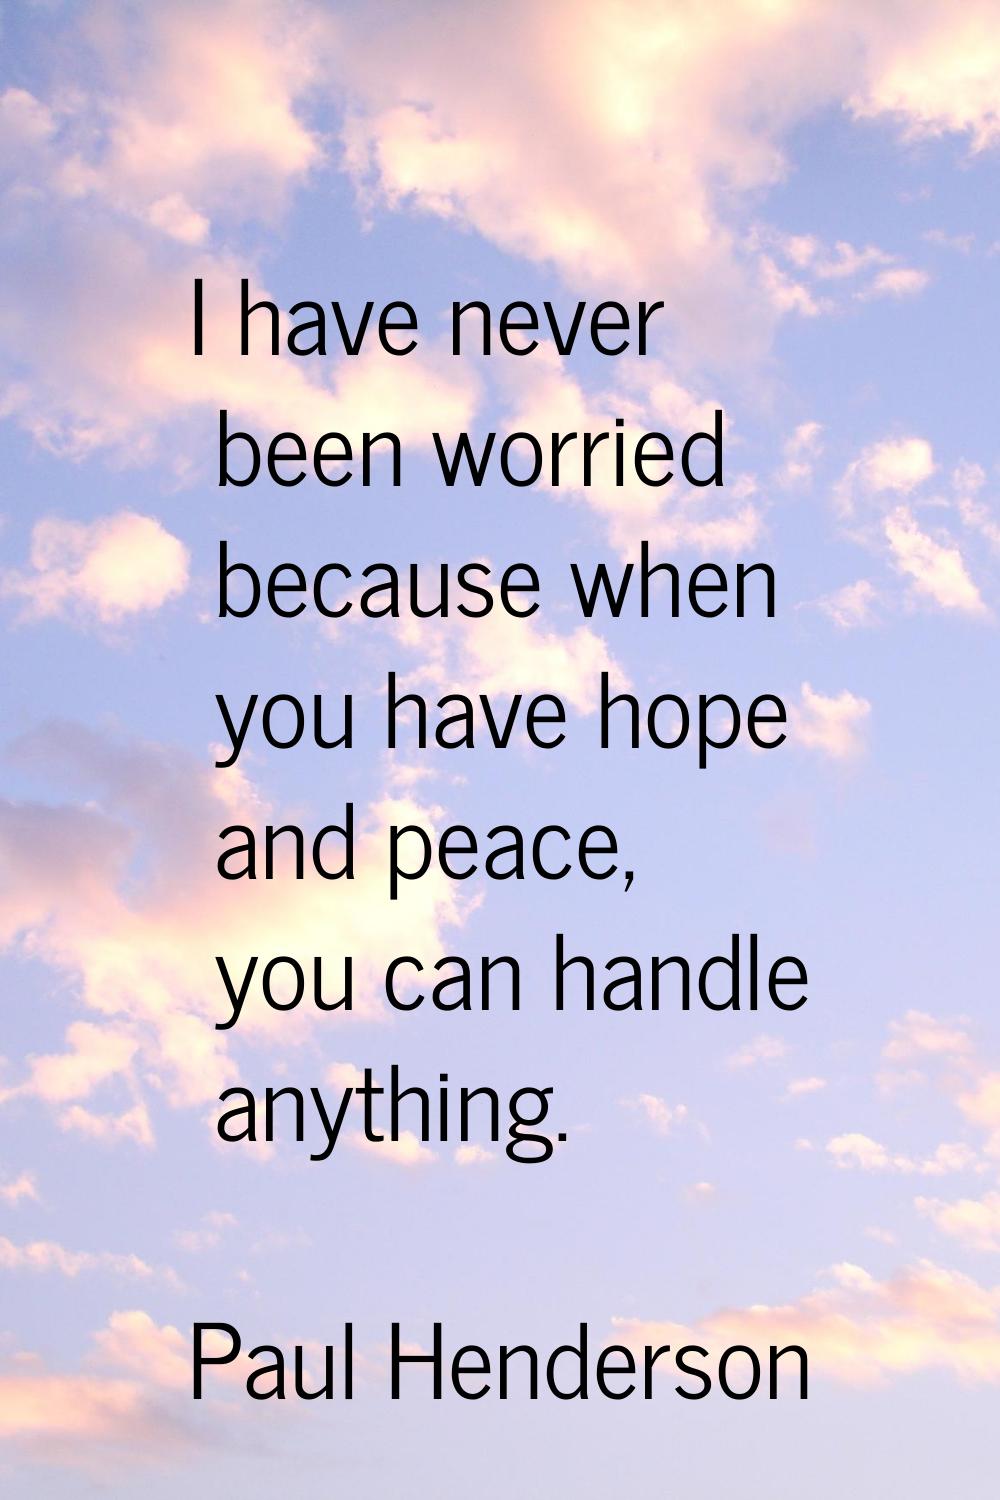 I have never been worried because when you have hope and peace, you can handle anything.